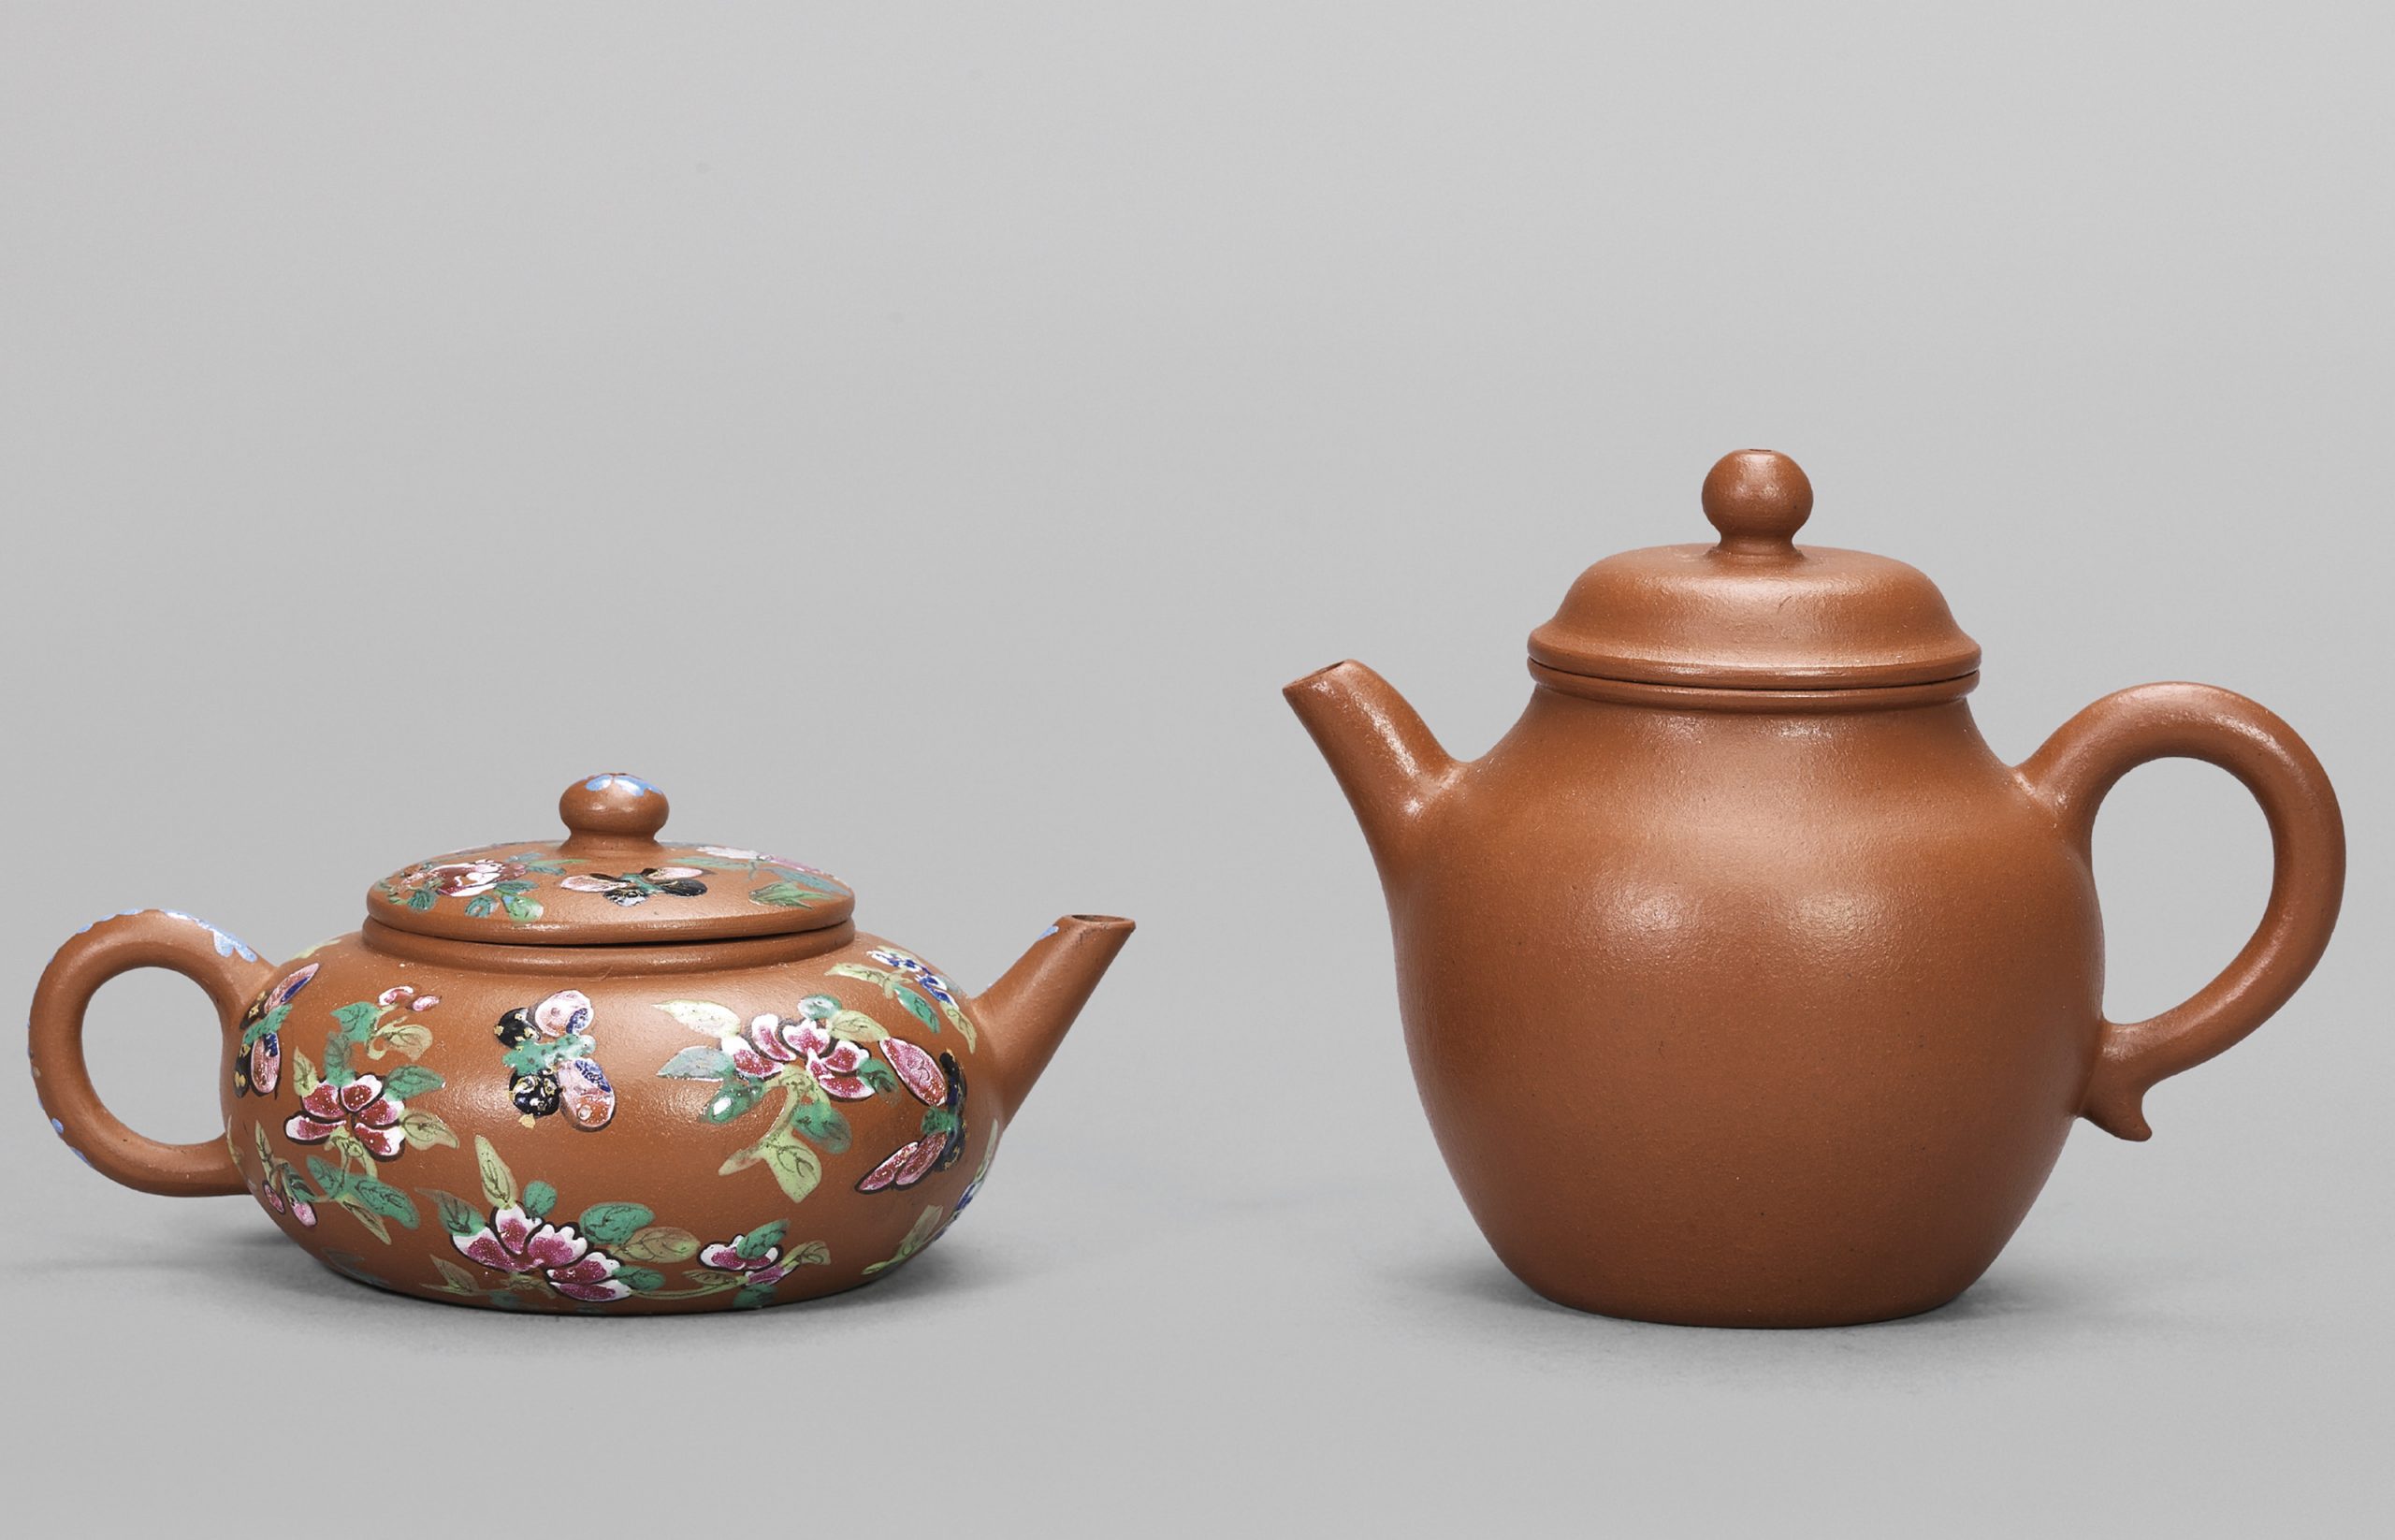 TWO YIXING TEAPOTS LATE QING DYNASTY, 19TH CENTURY